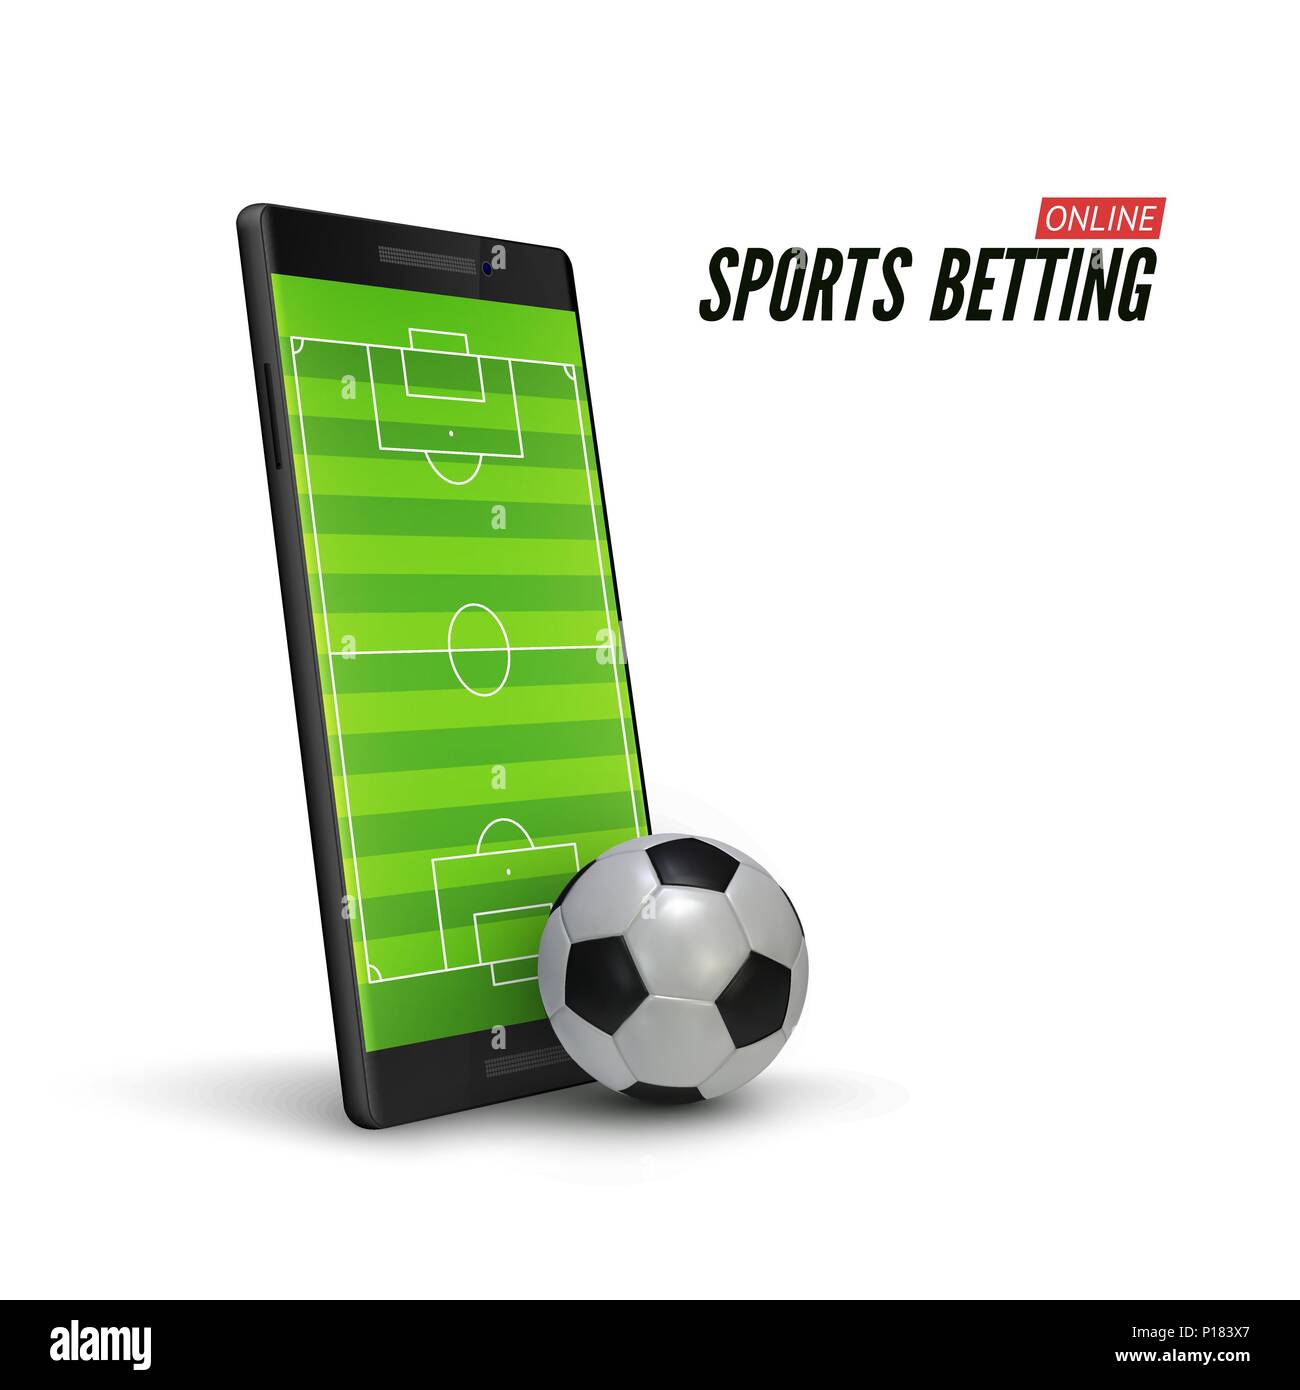 Finding Customers With betting Part B